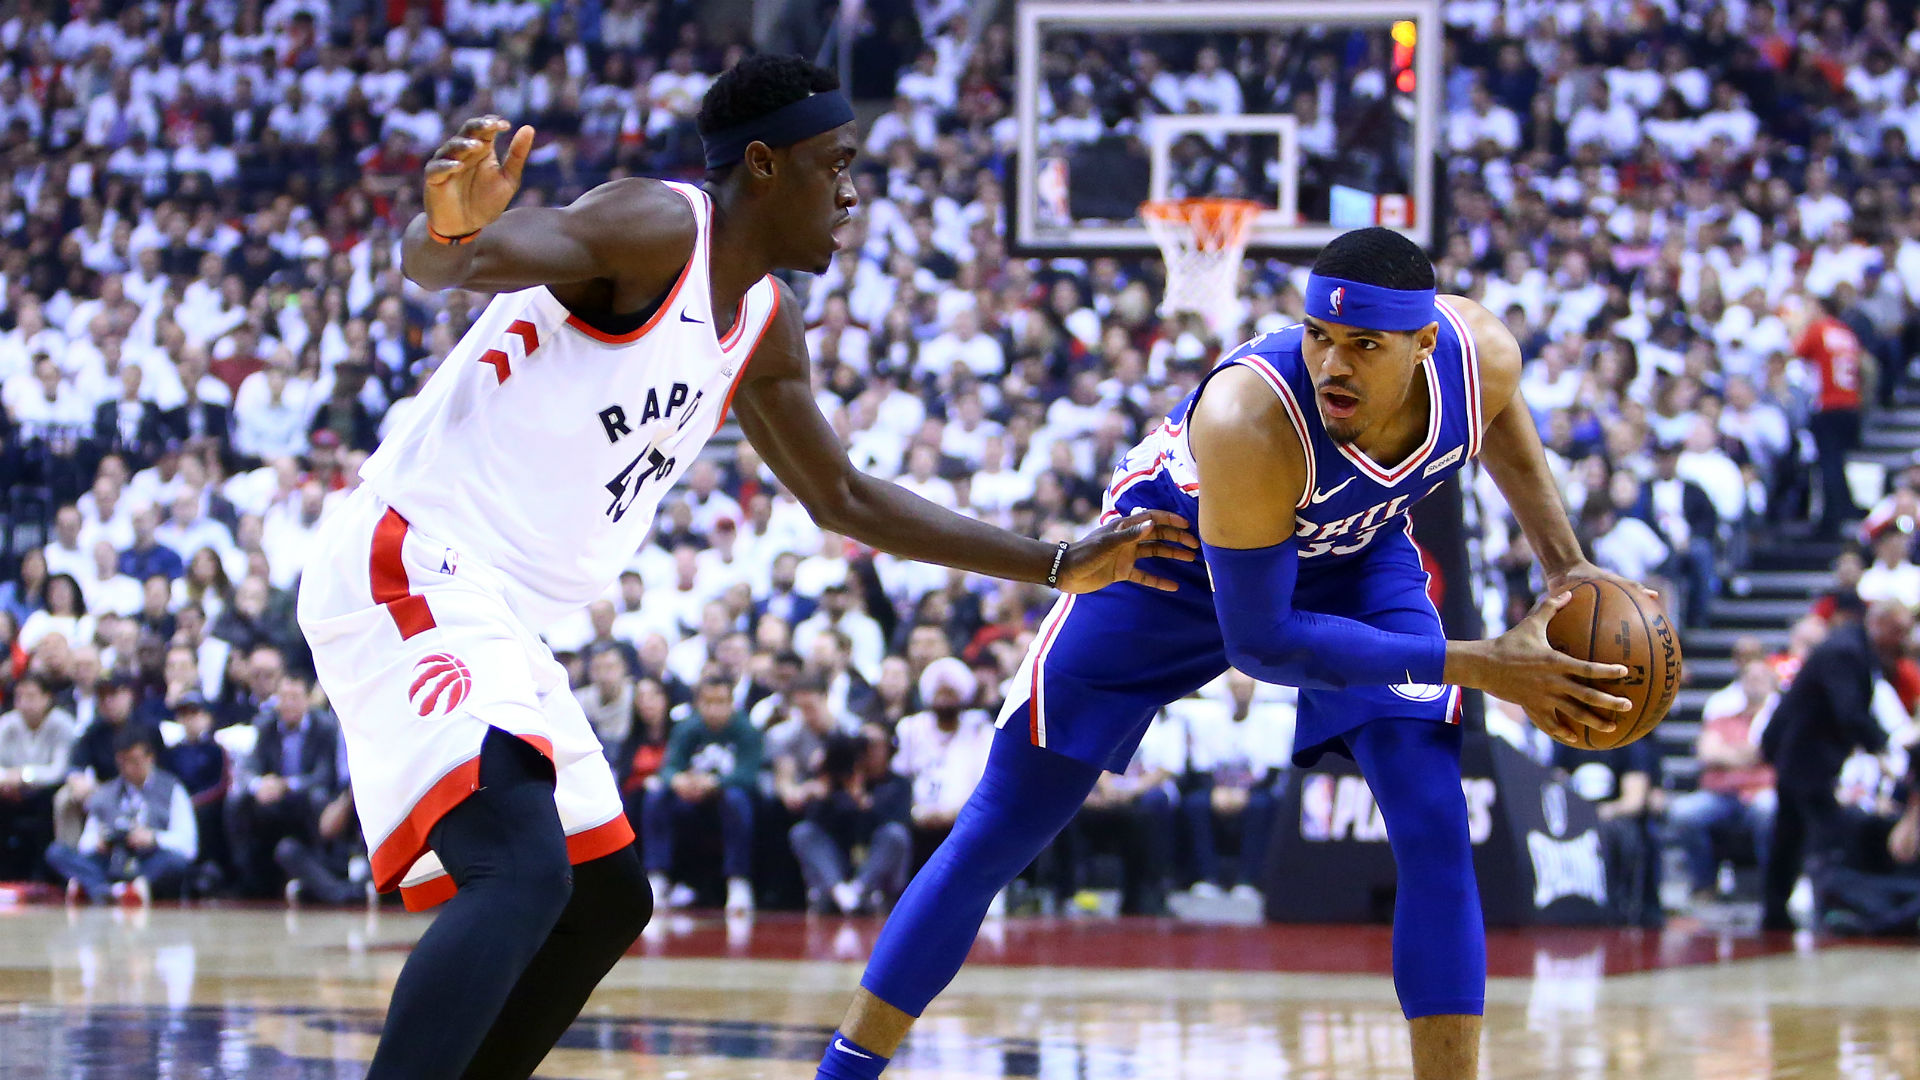 Raptors blow out 76ers in Game 5 victory | Sporting News1920 x 1080